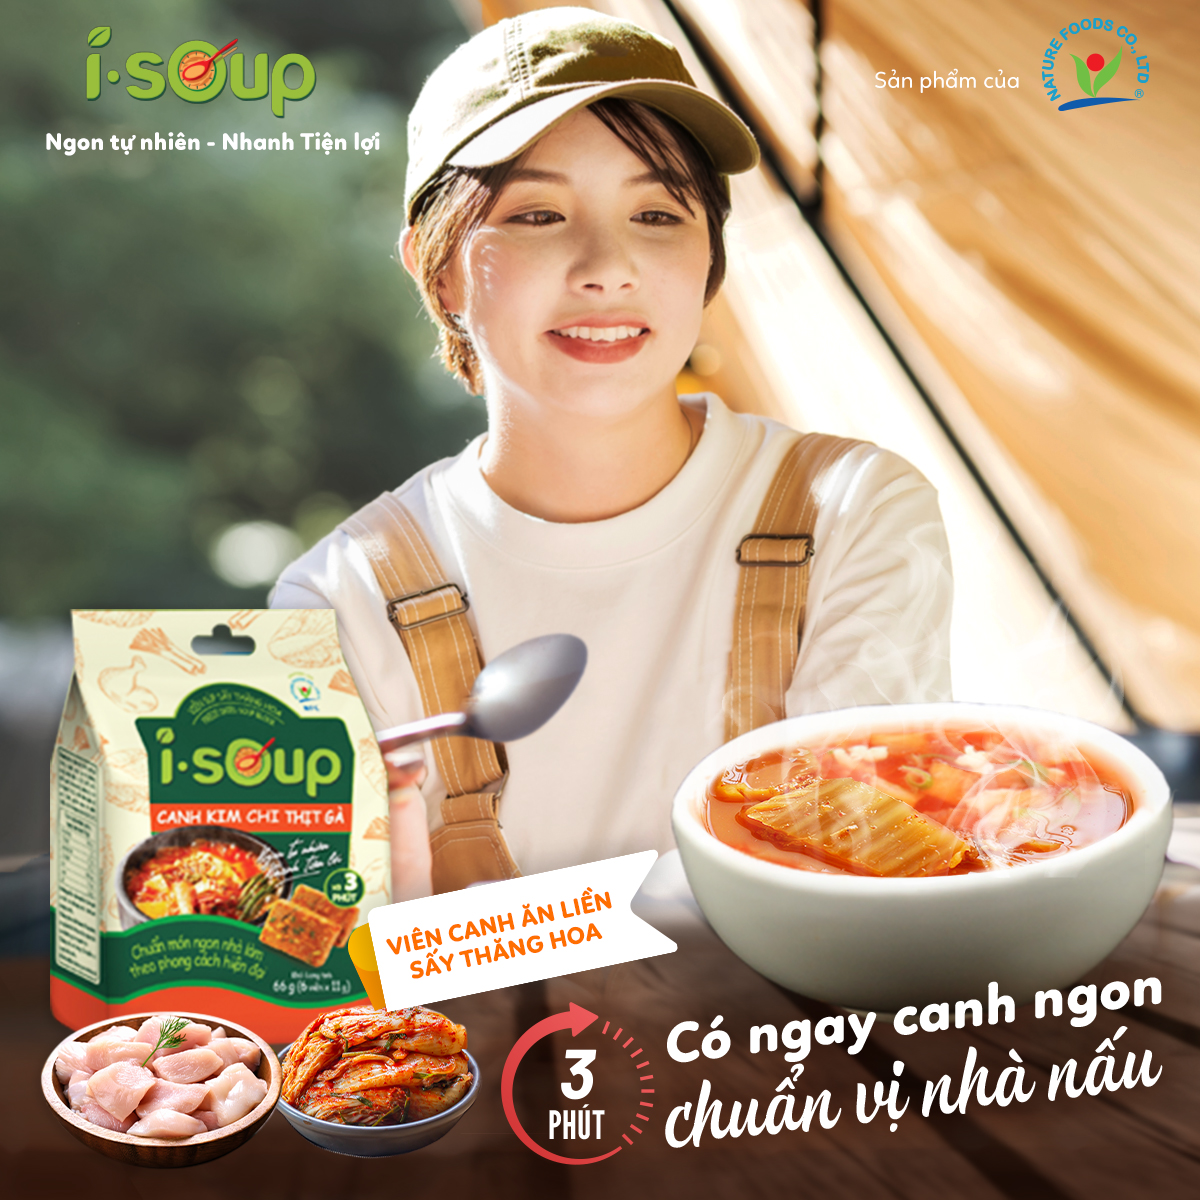 Combo Best Seller 3 Túi Canh I-Soup Mặn